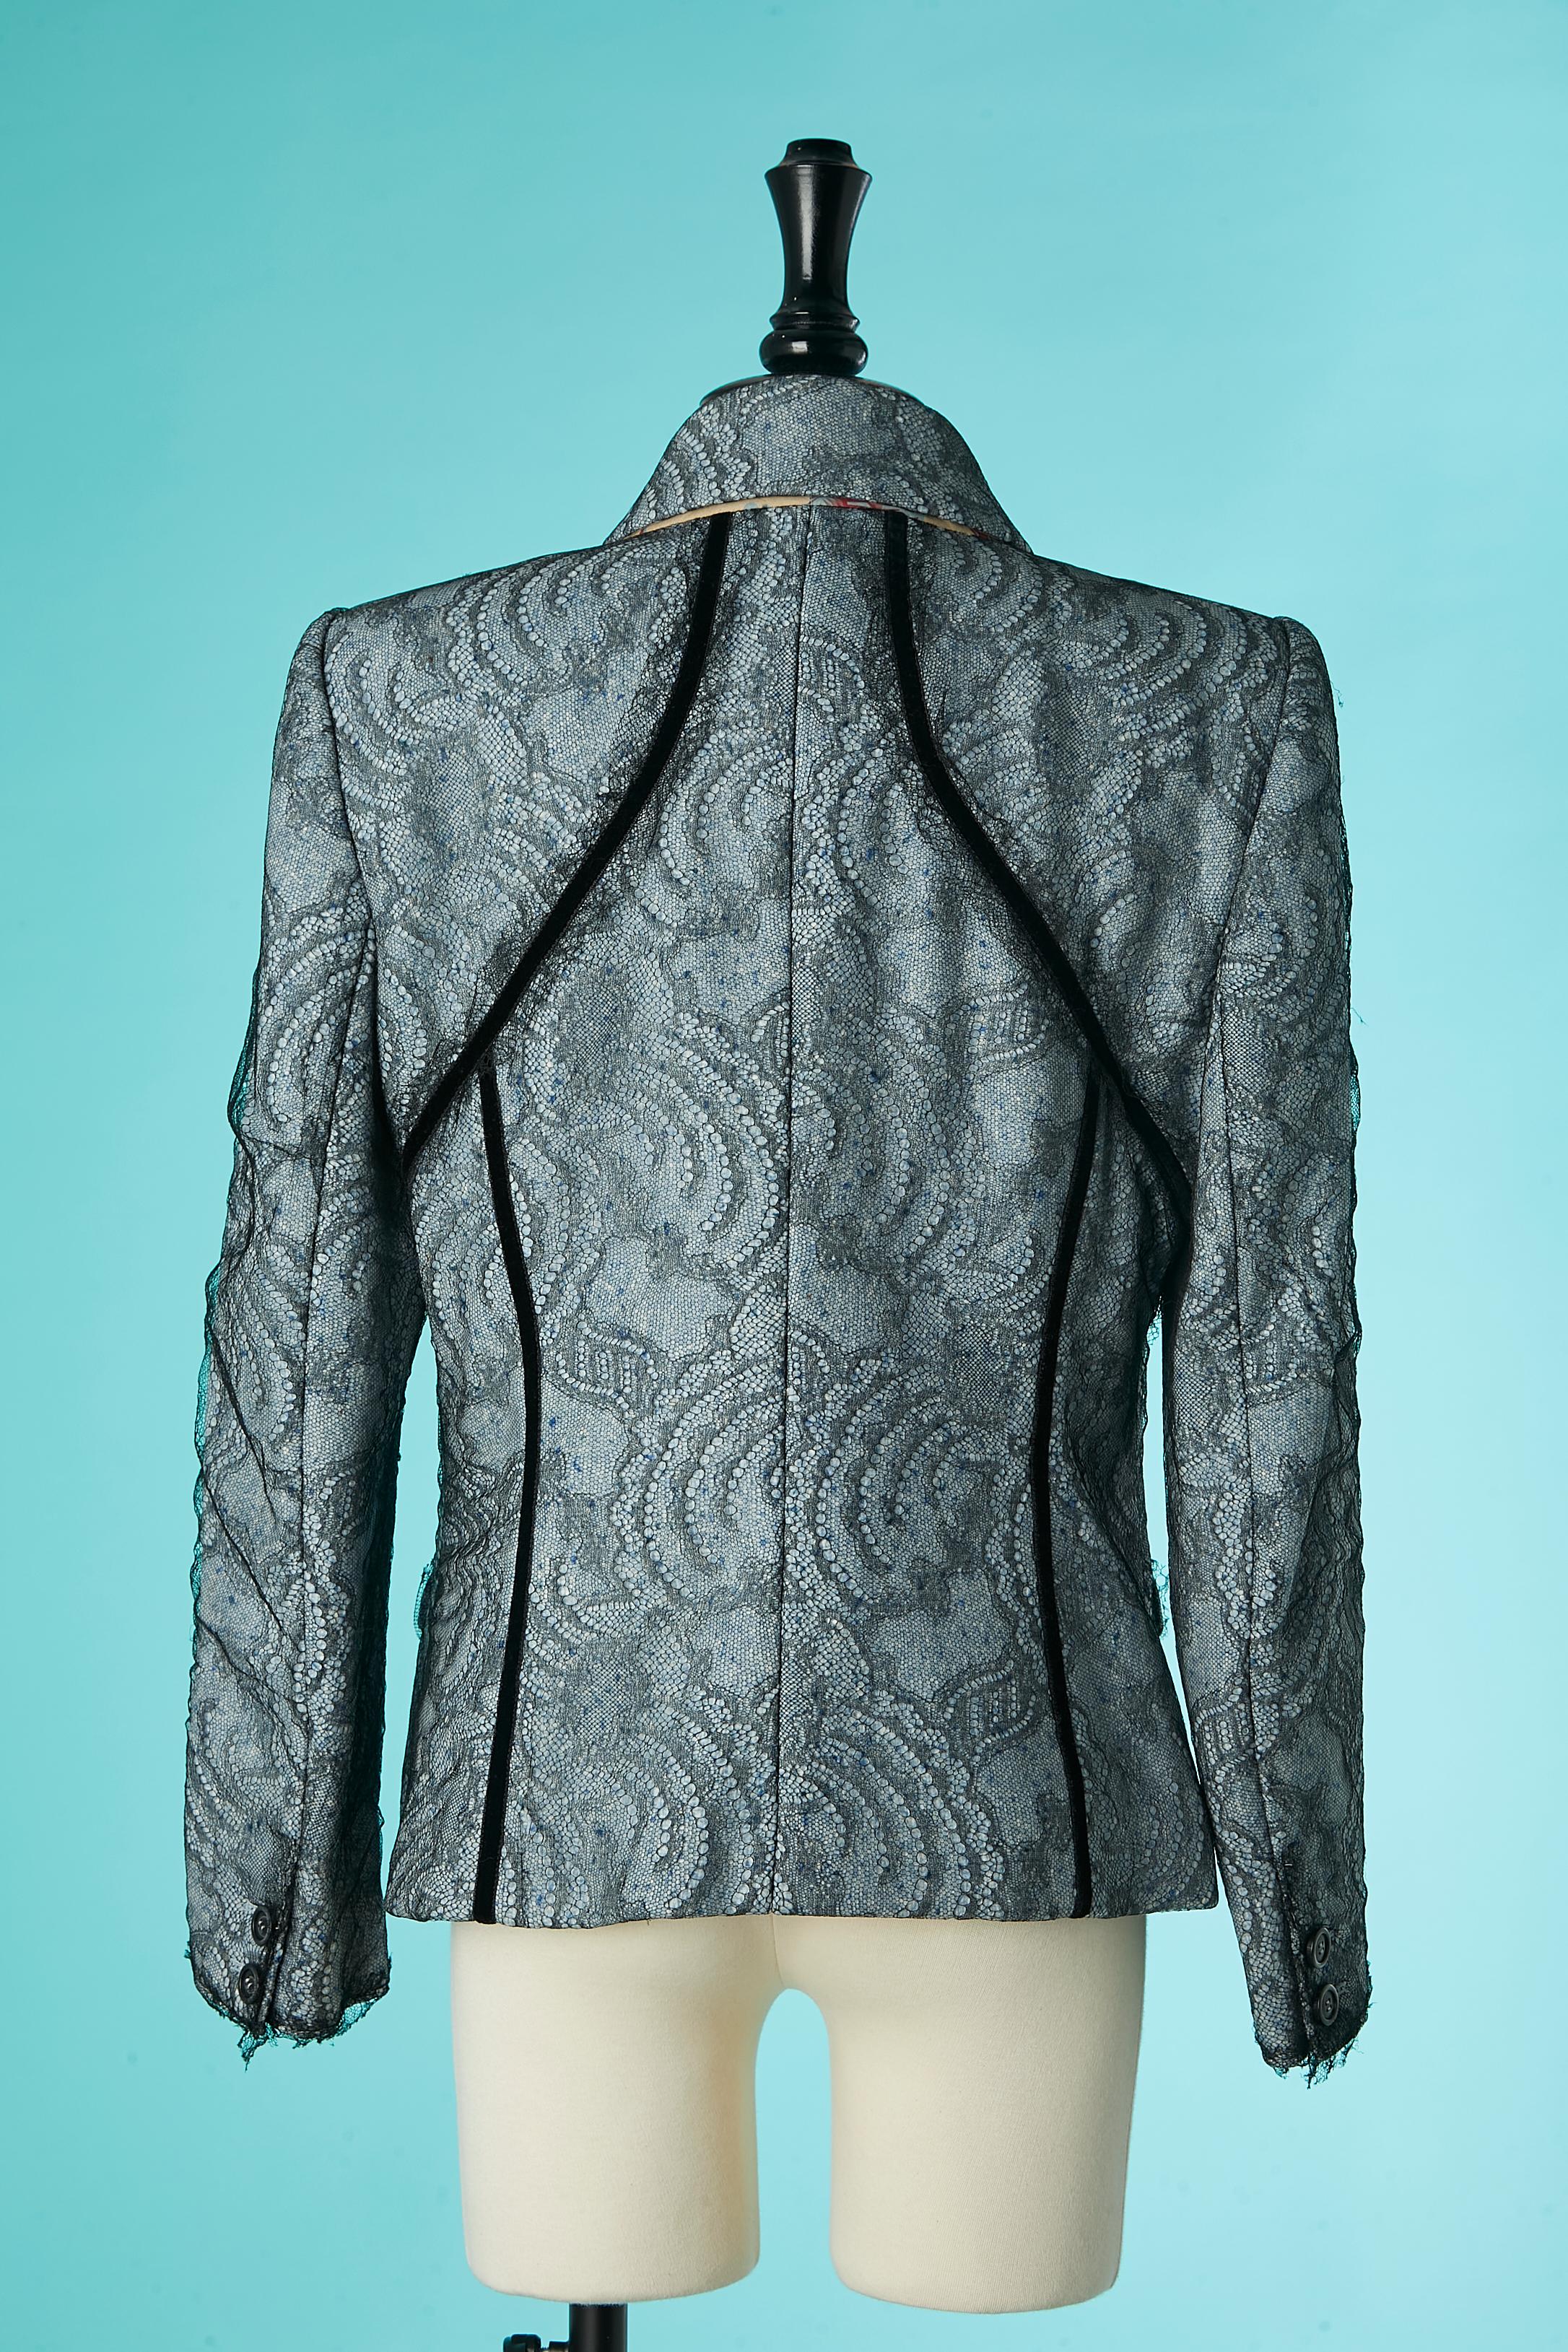 Jacket with overlay of lace on top of wool chiné lay Christian Lacroix  For Sale 3